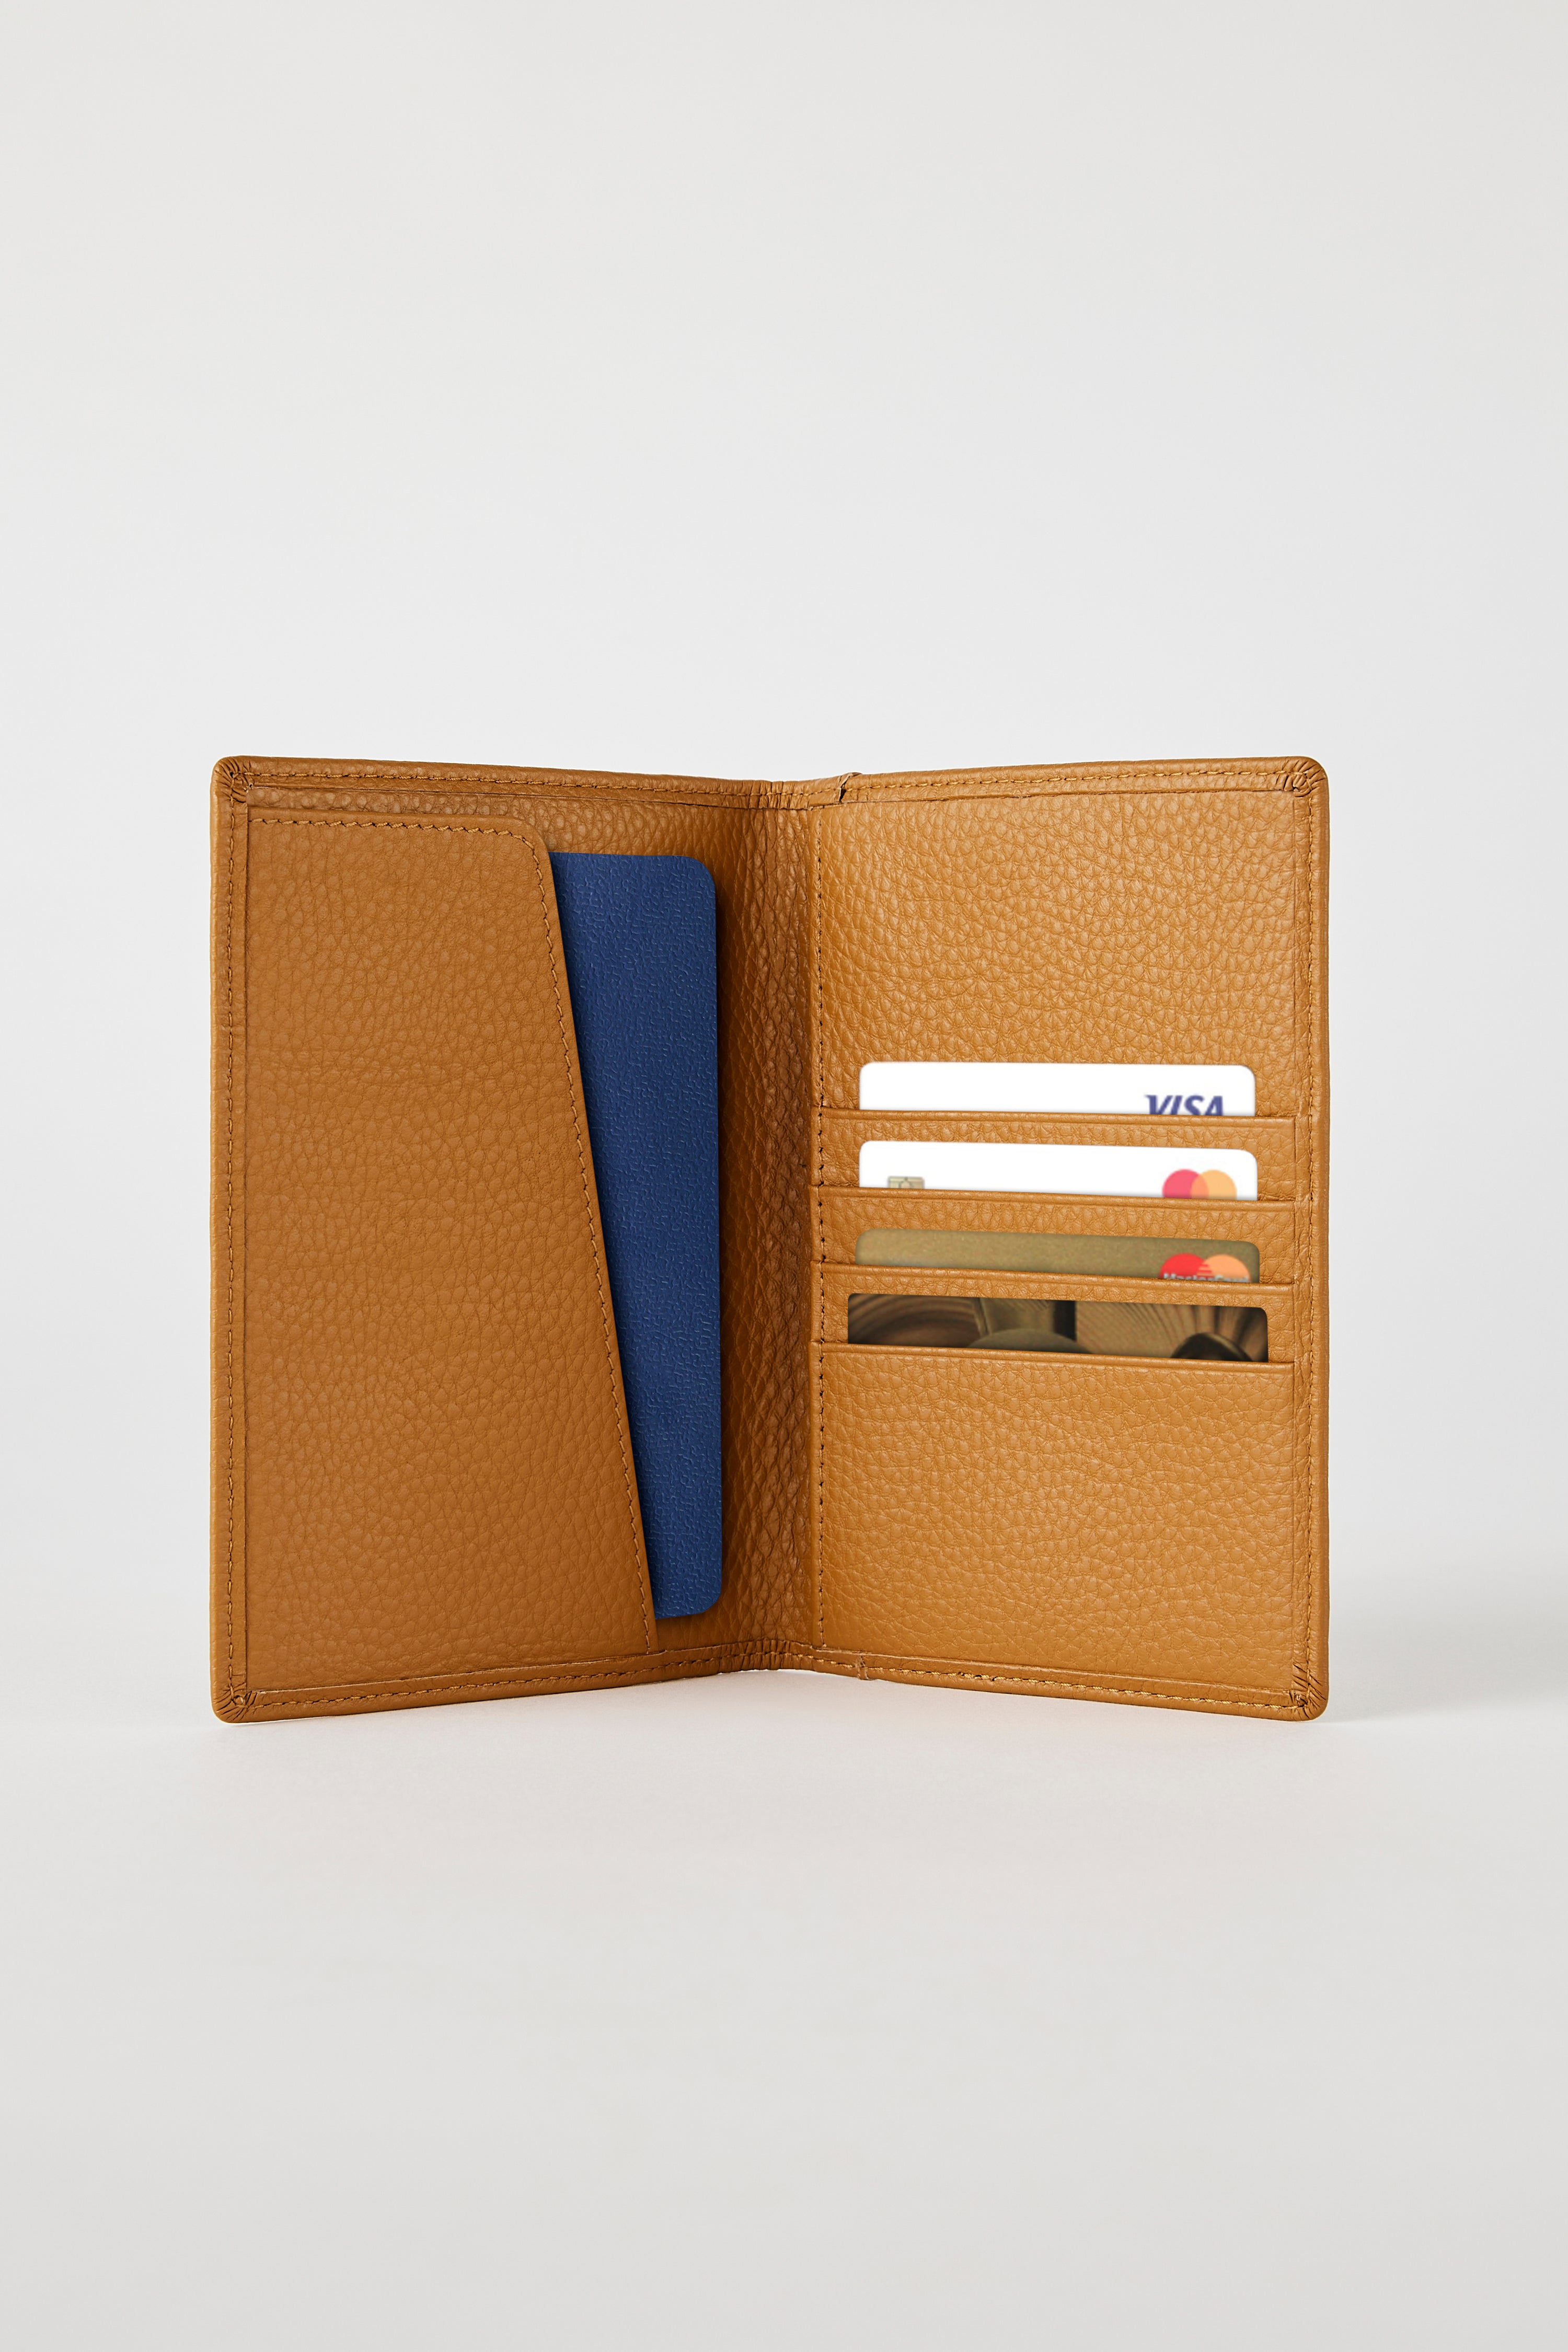 Image of Leather Passport Wallet